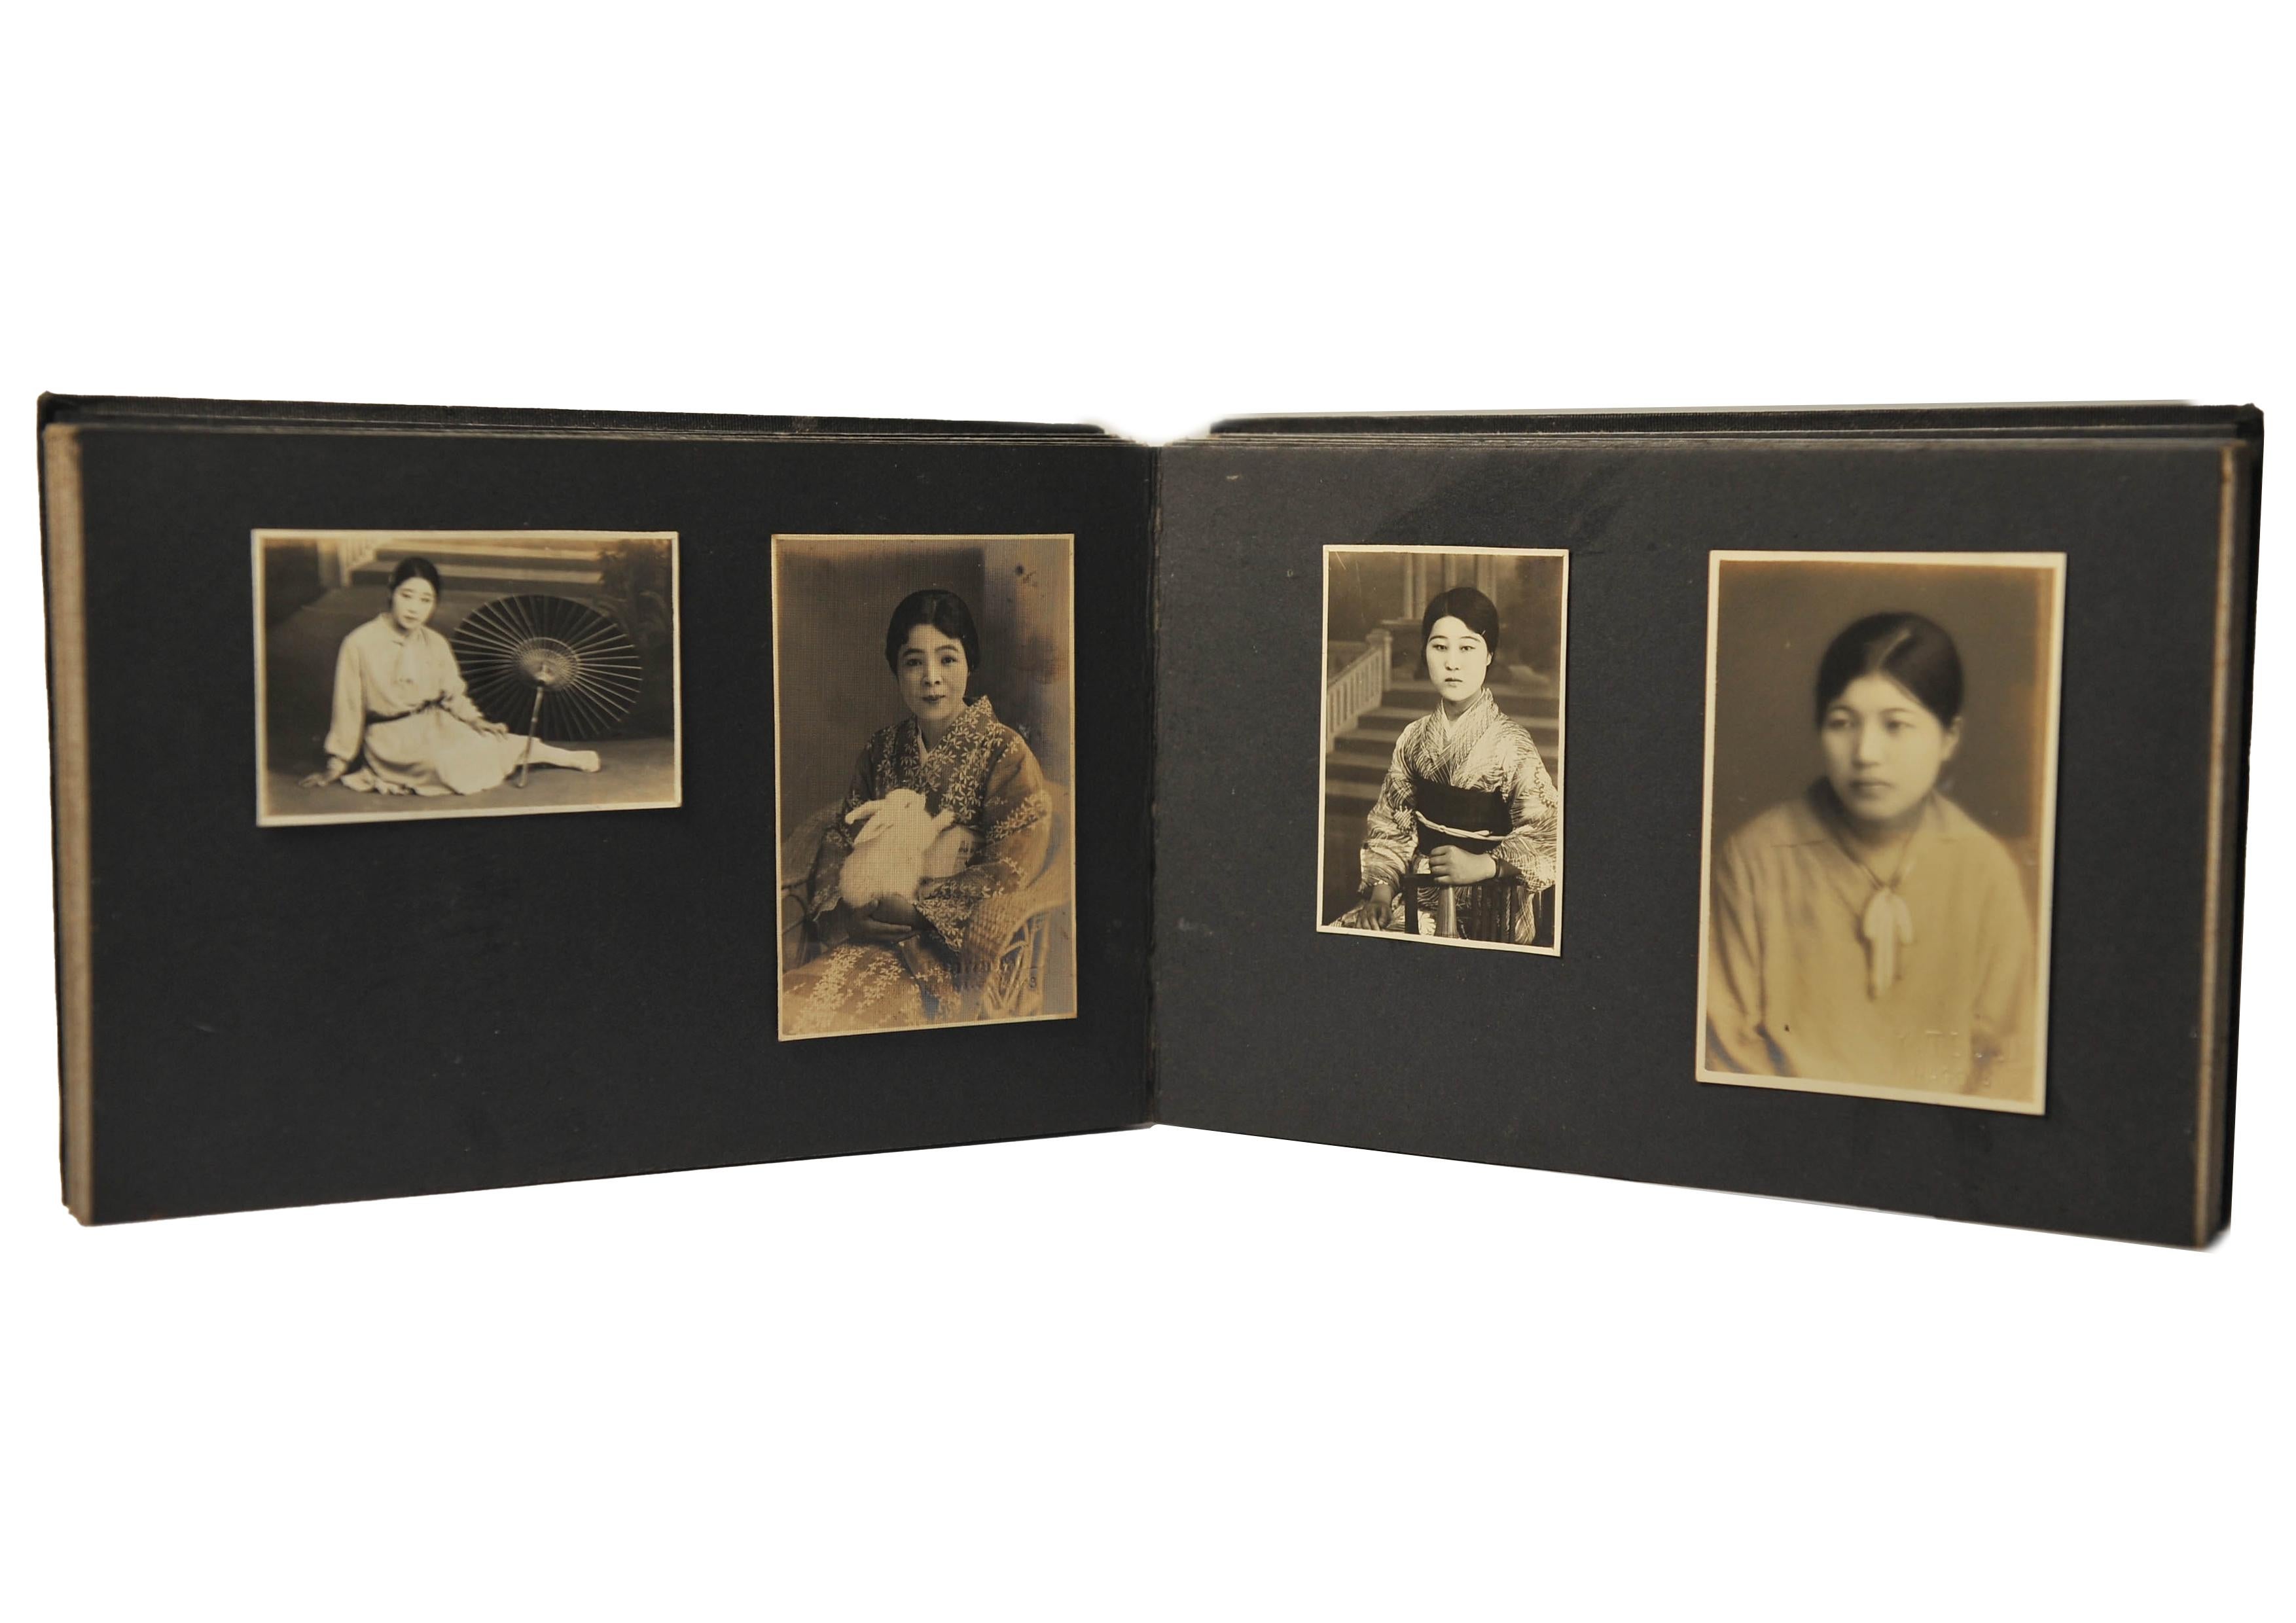 Japanese Art Deco Early 20th Century Photo Album With Photos Included In Good Condition For Sale In High Wycombe, GB